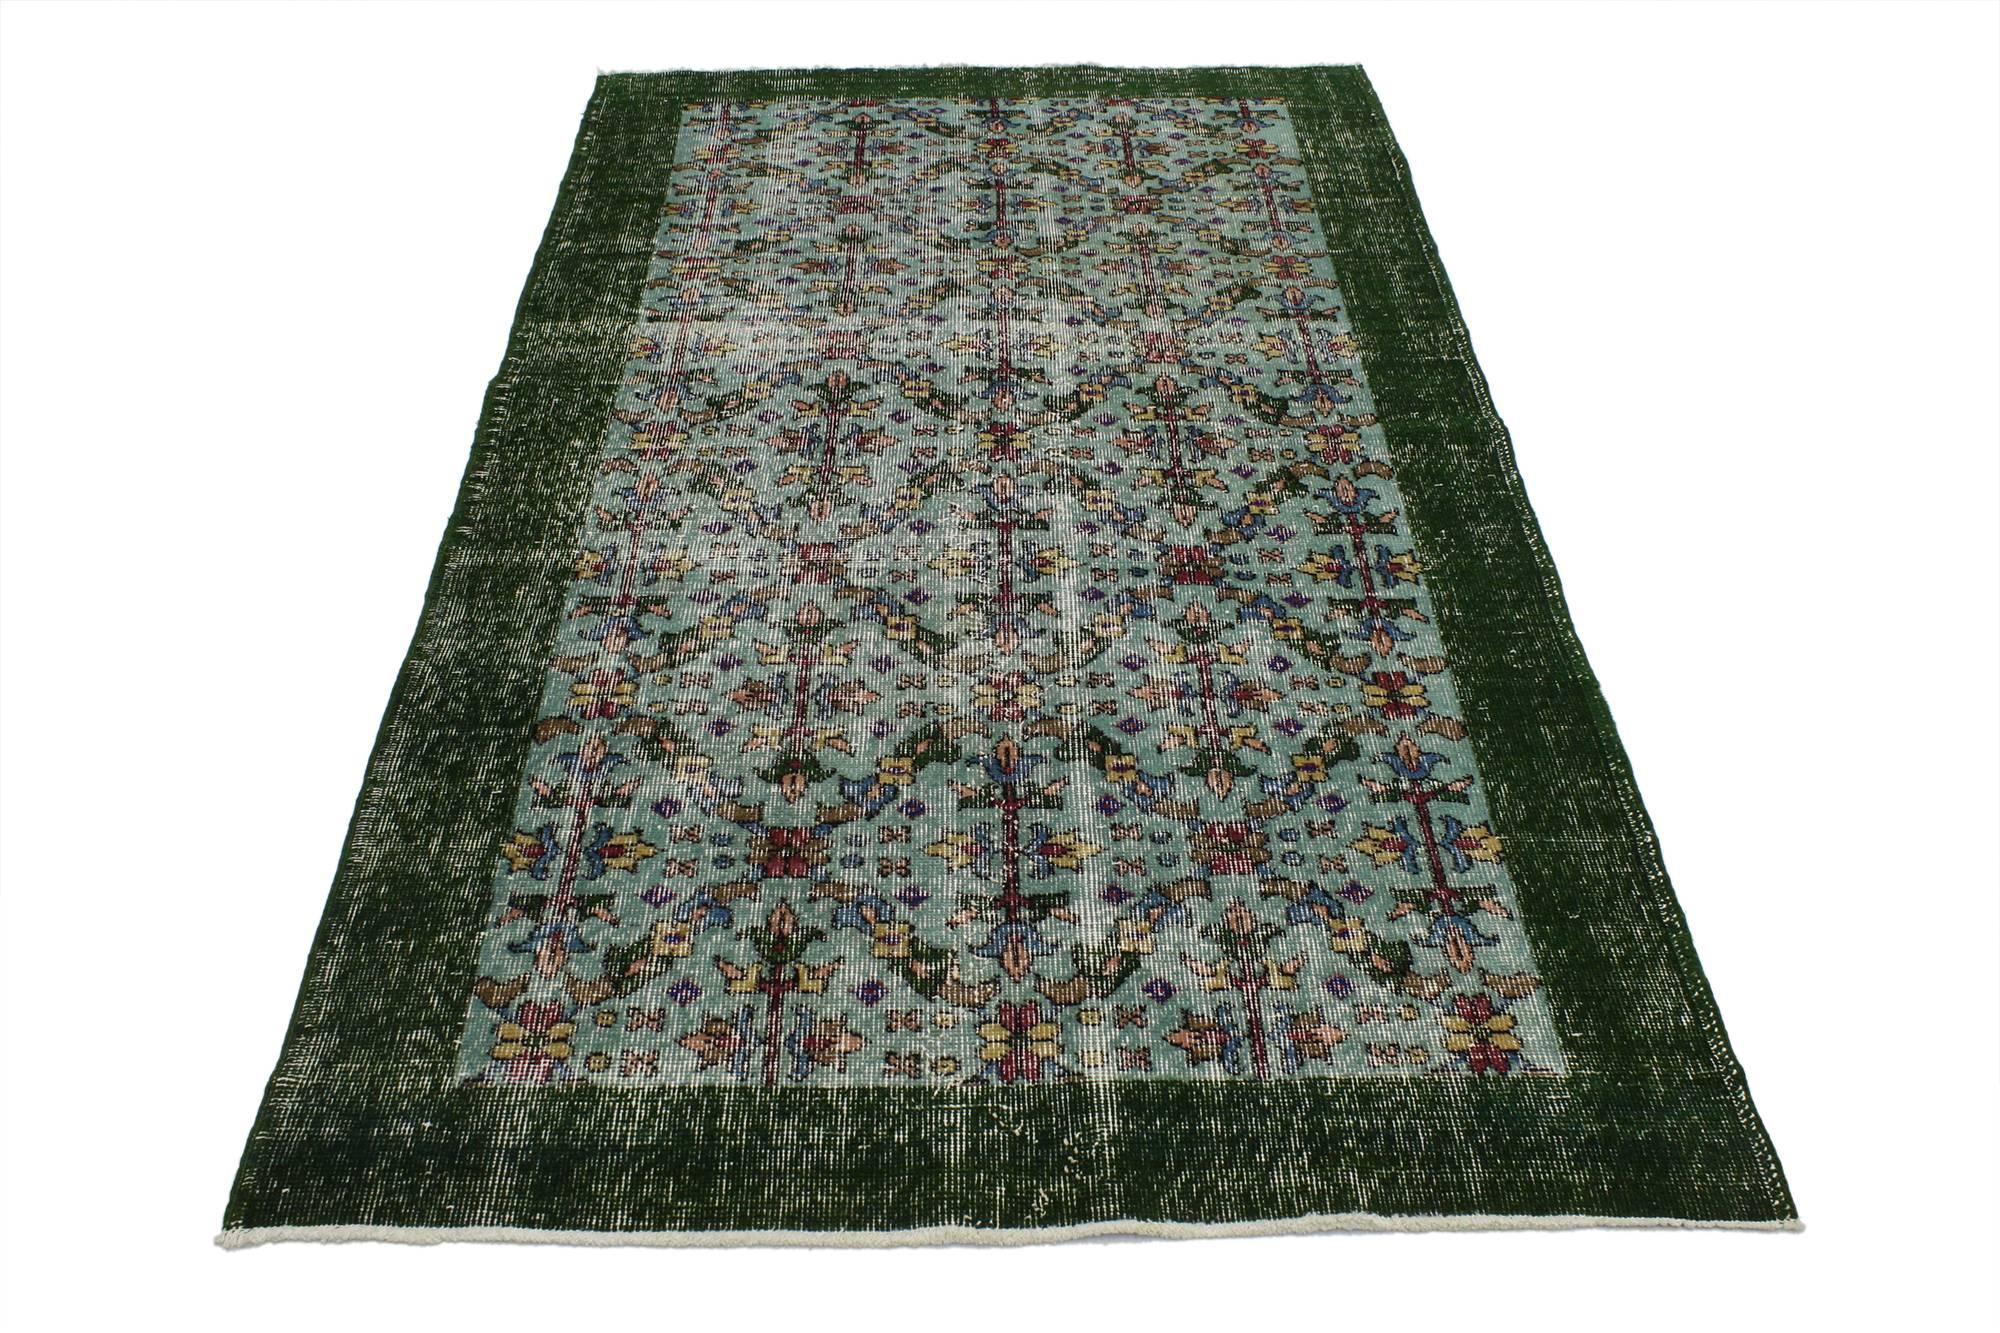 51978, Zeki Muren Distressed Vintage Turkish Sivas Rug With Industrial Art Deco Style, 03'11 x 06'09. This distressed vintage Turkish Sivas rug with modern Industrial Art Deco style features an all-over floral trellis pattern. Rendered in variegated